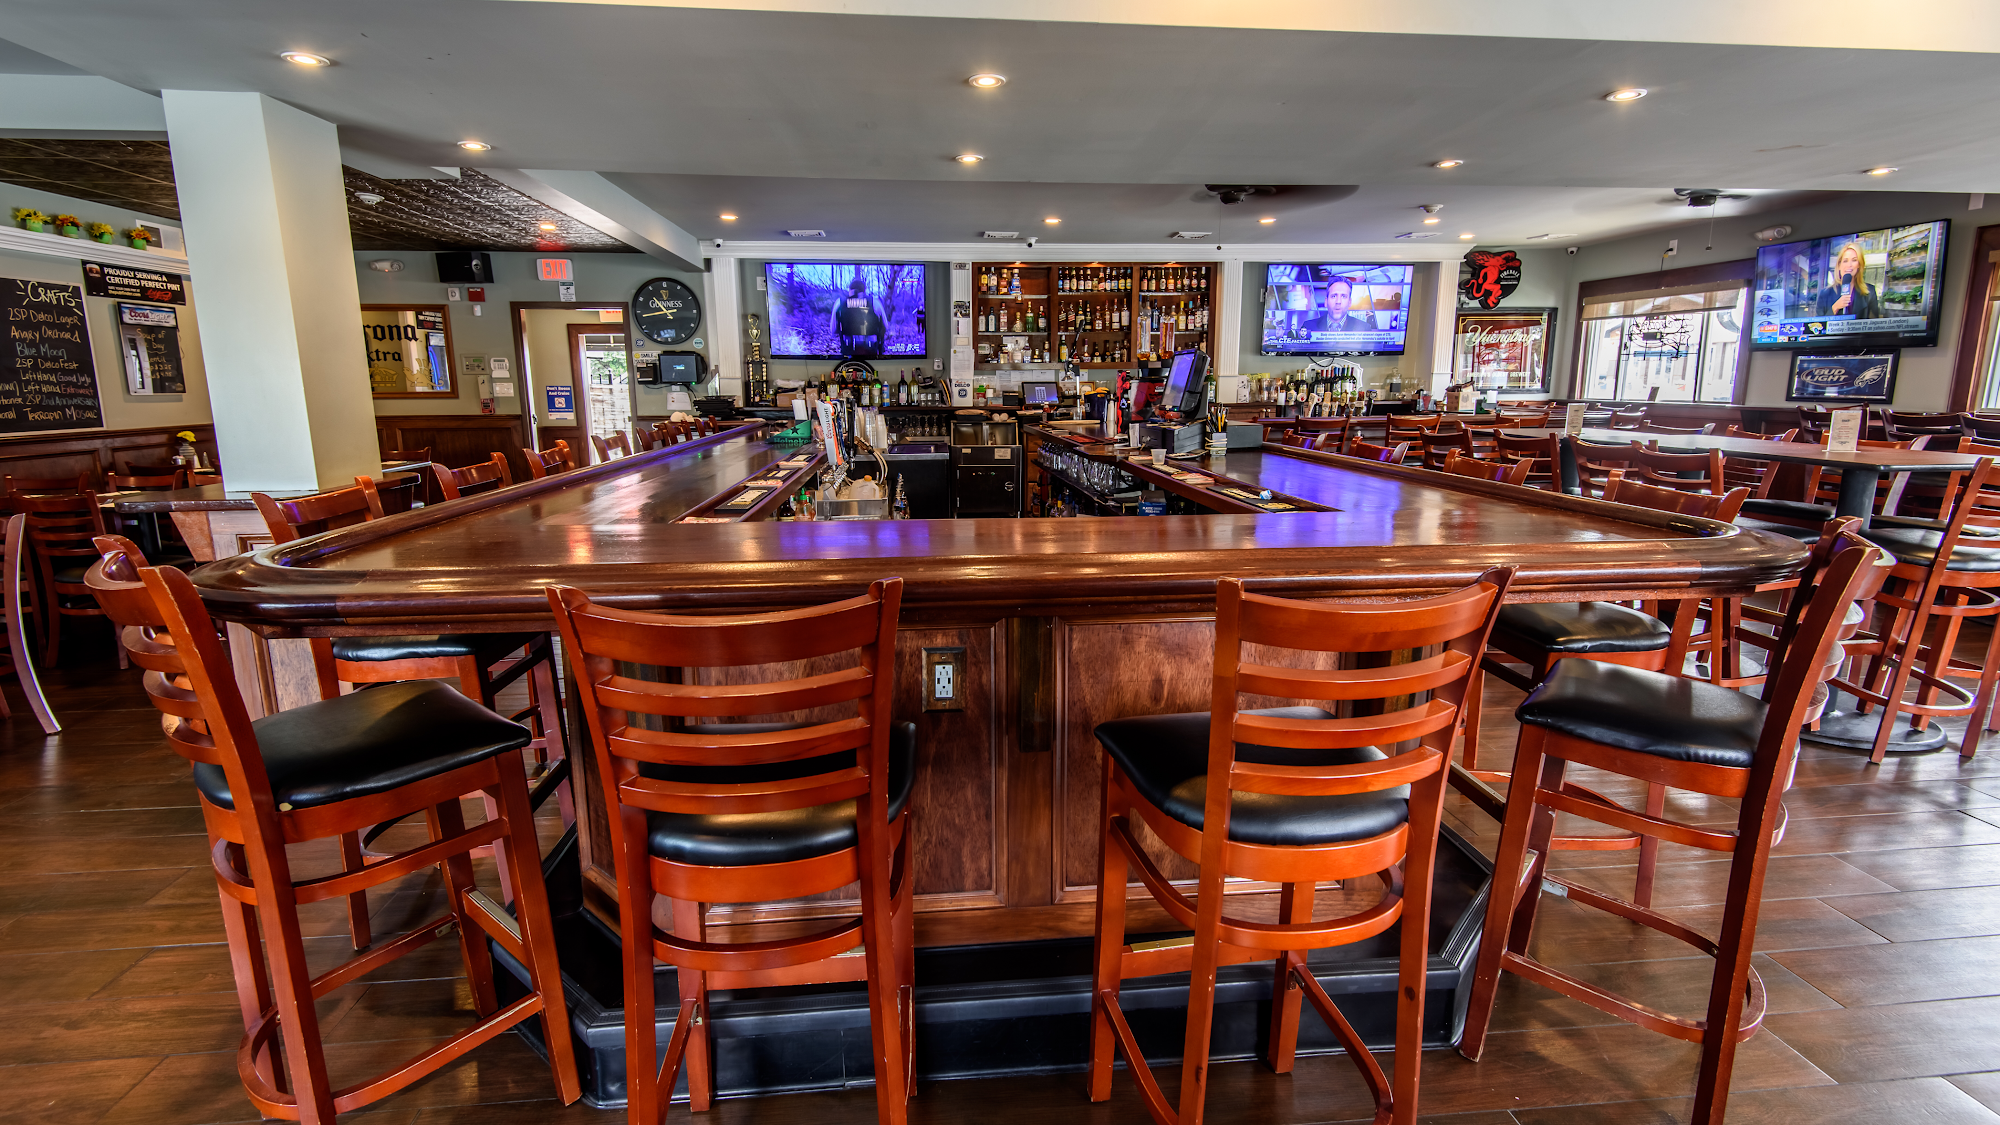 39 North Taproom and Grille